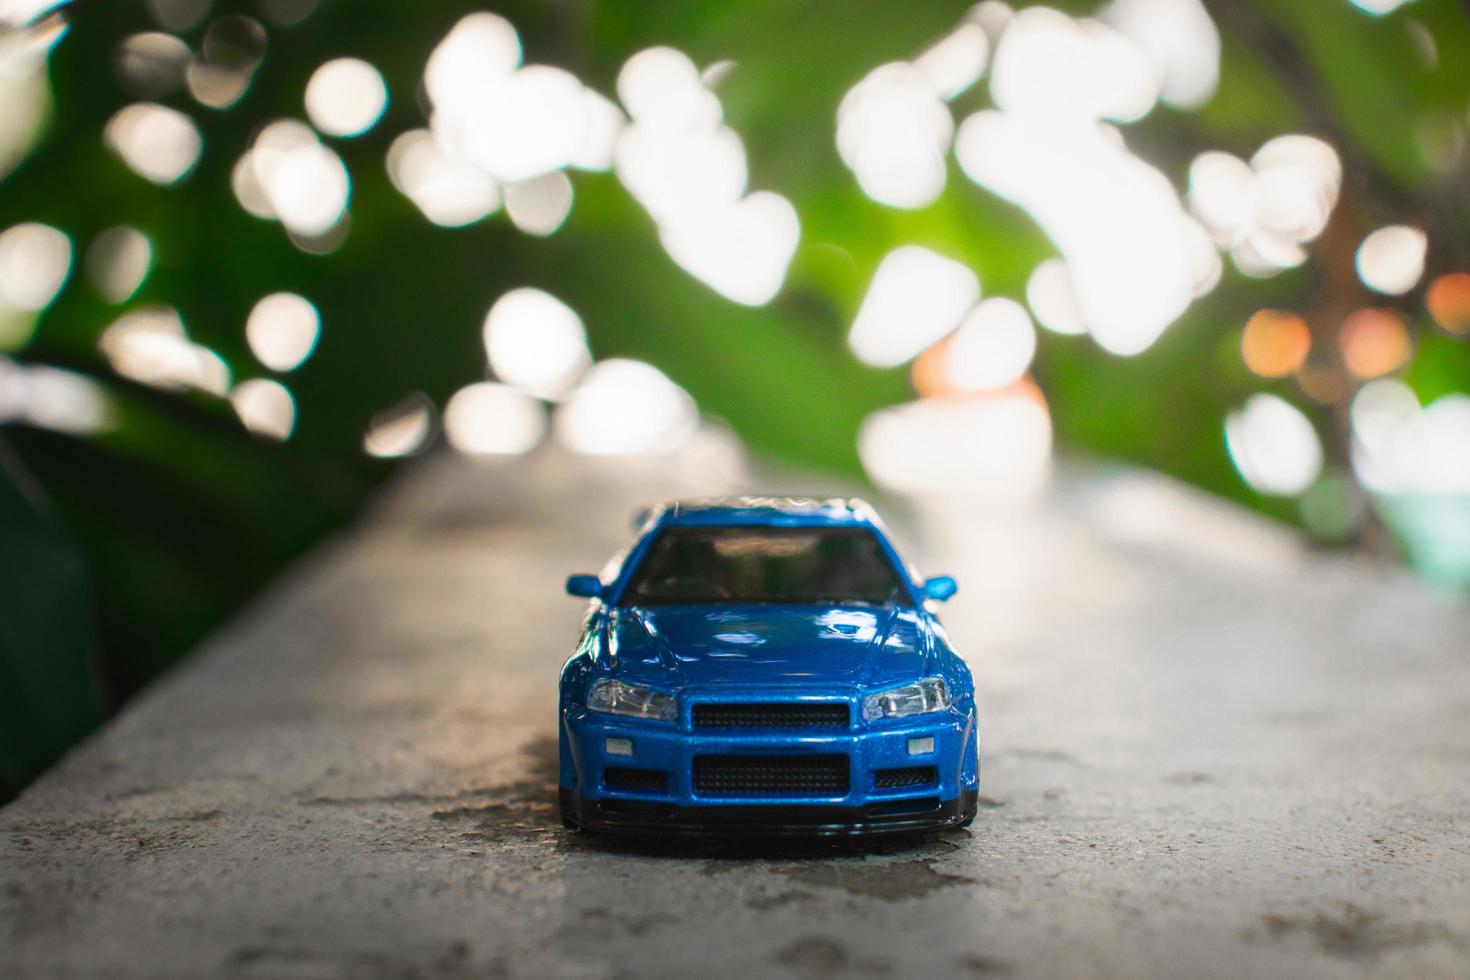 Concept for nature adventure. After some edits, a photo of blue toy car placed near a tree.